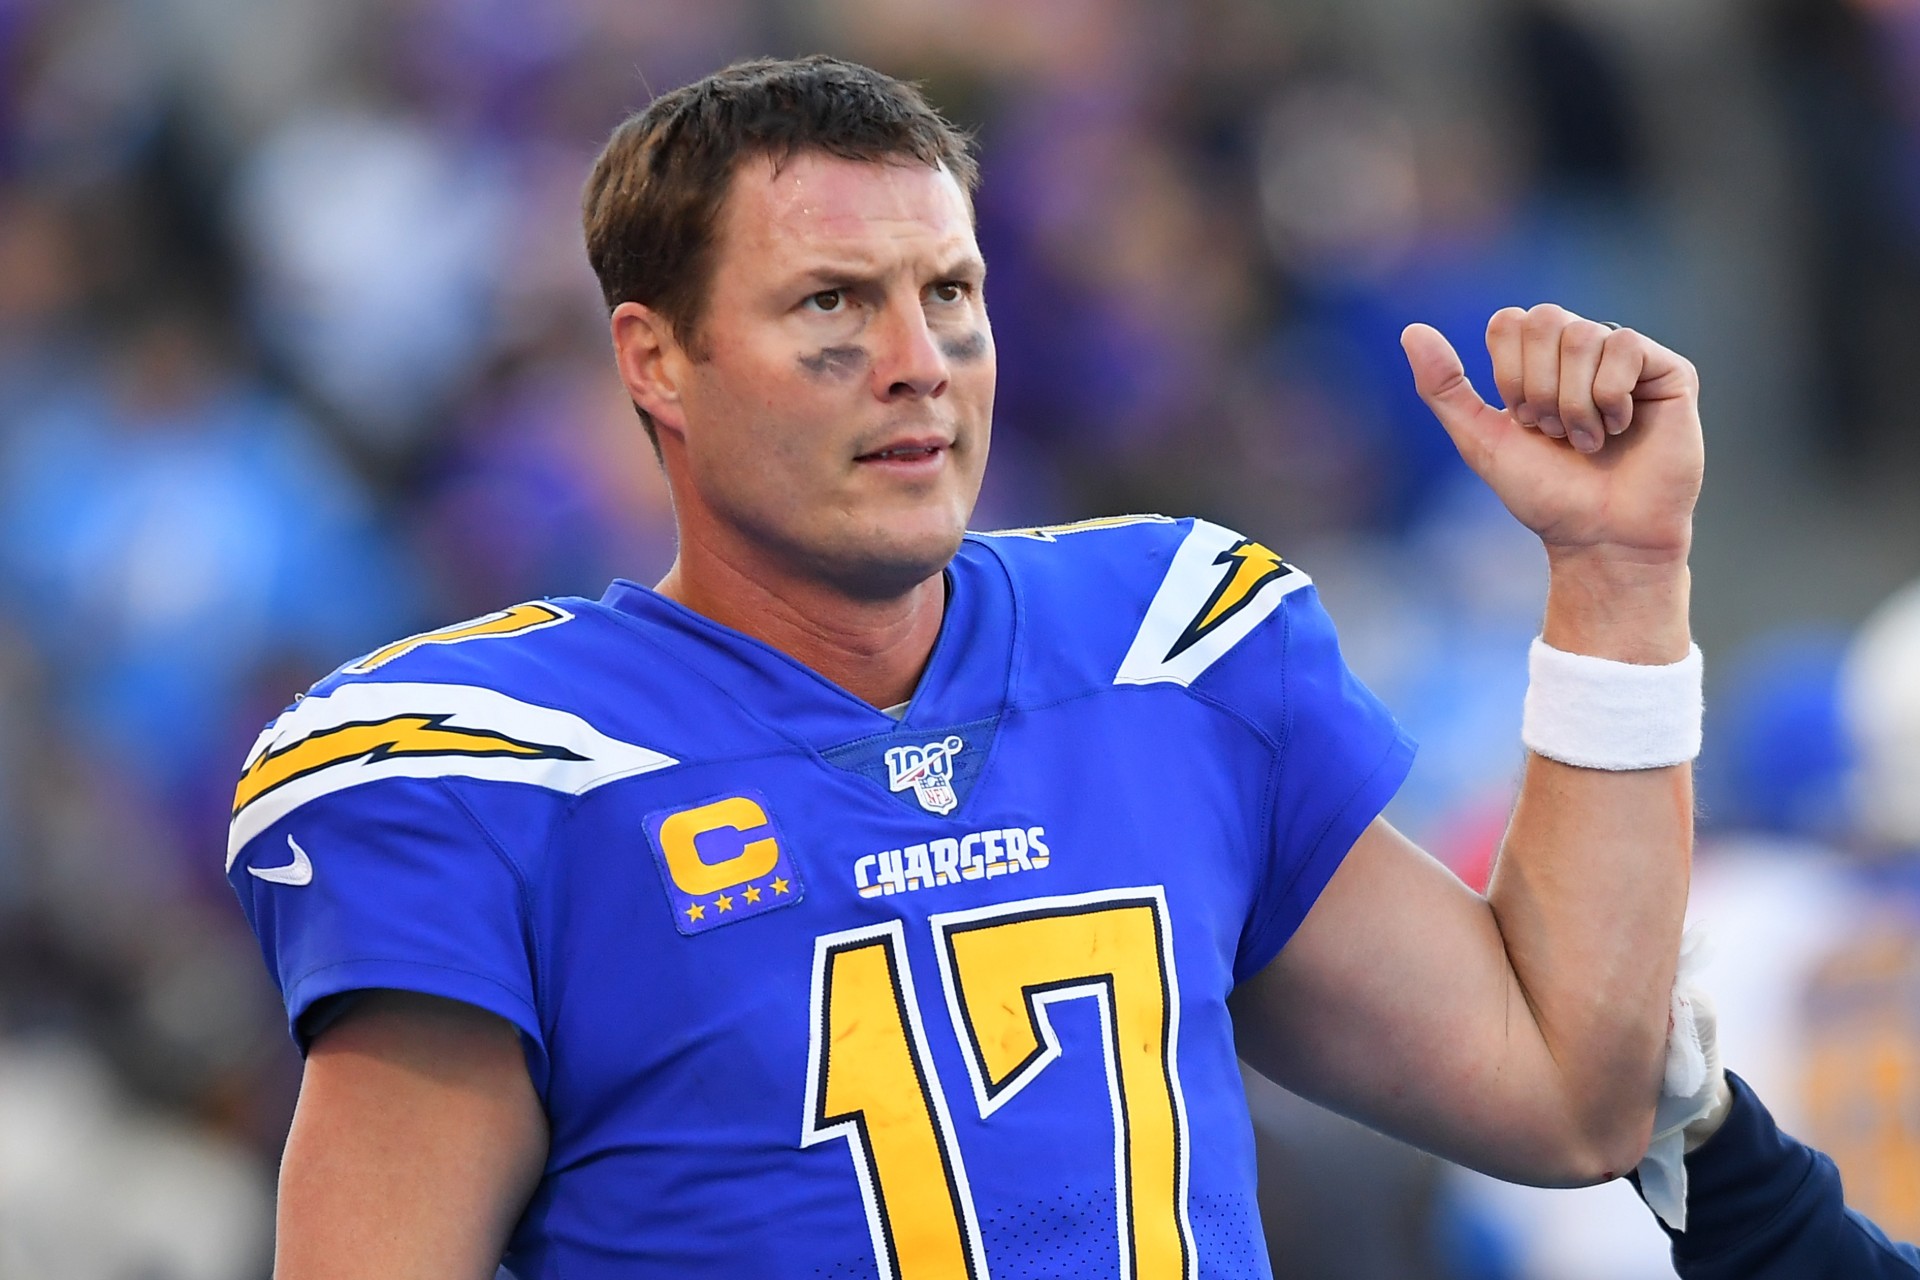 Philip Rivers wearing a blueee football uniforrm and a white wristband